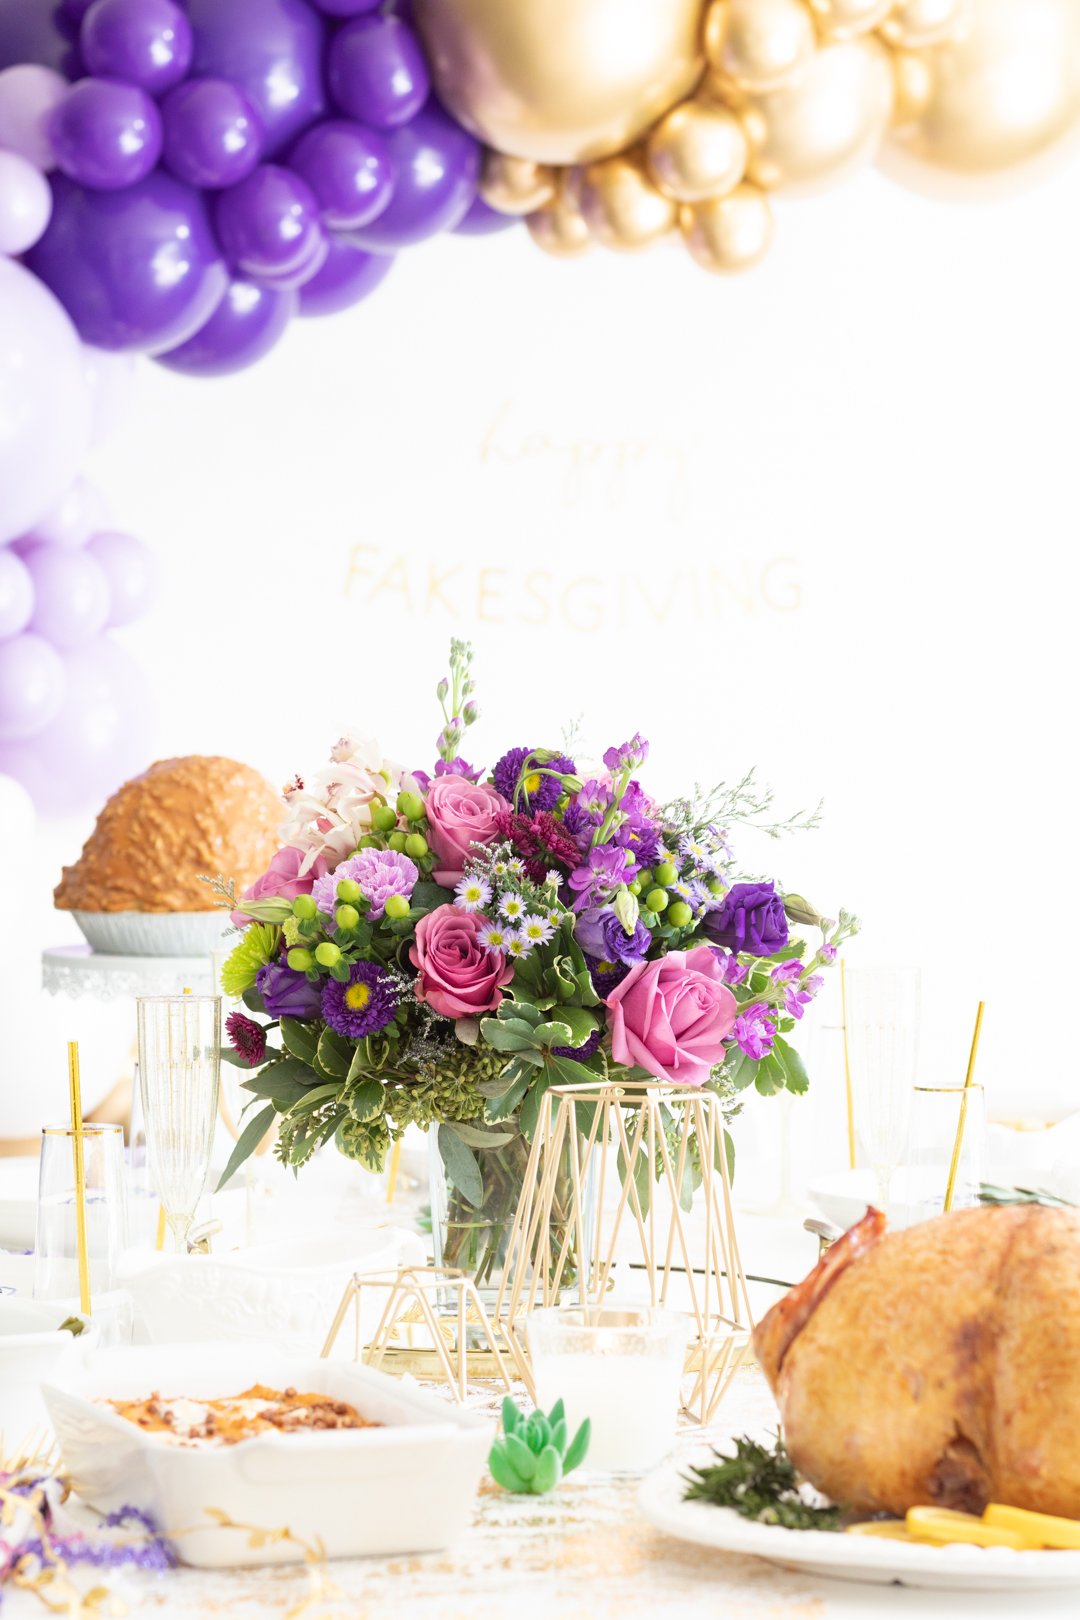 Pretty bouquet of flowers being showcased on a fakesgiving party table